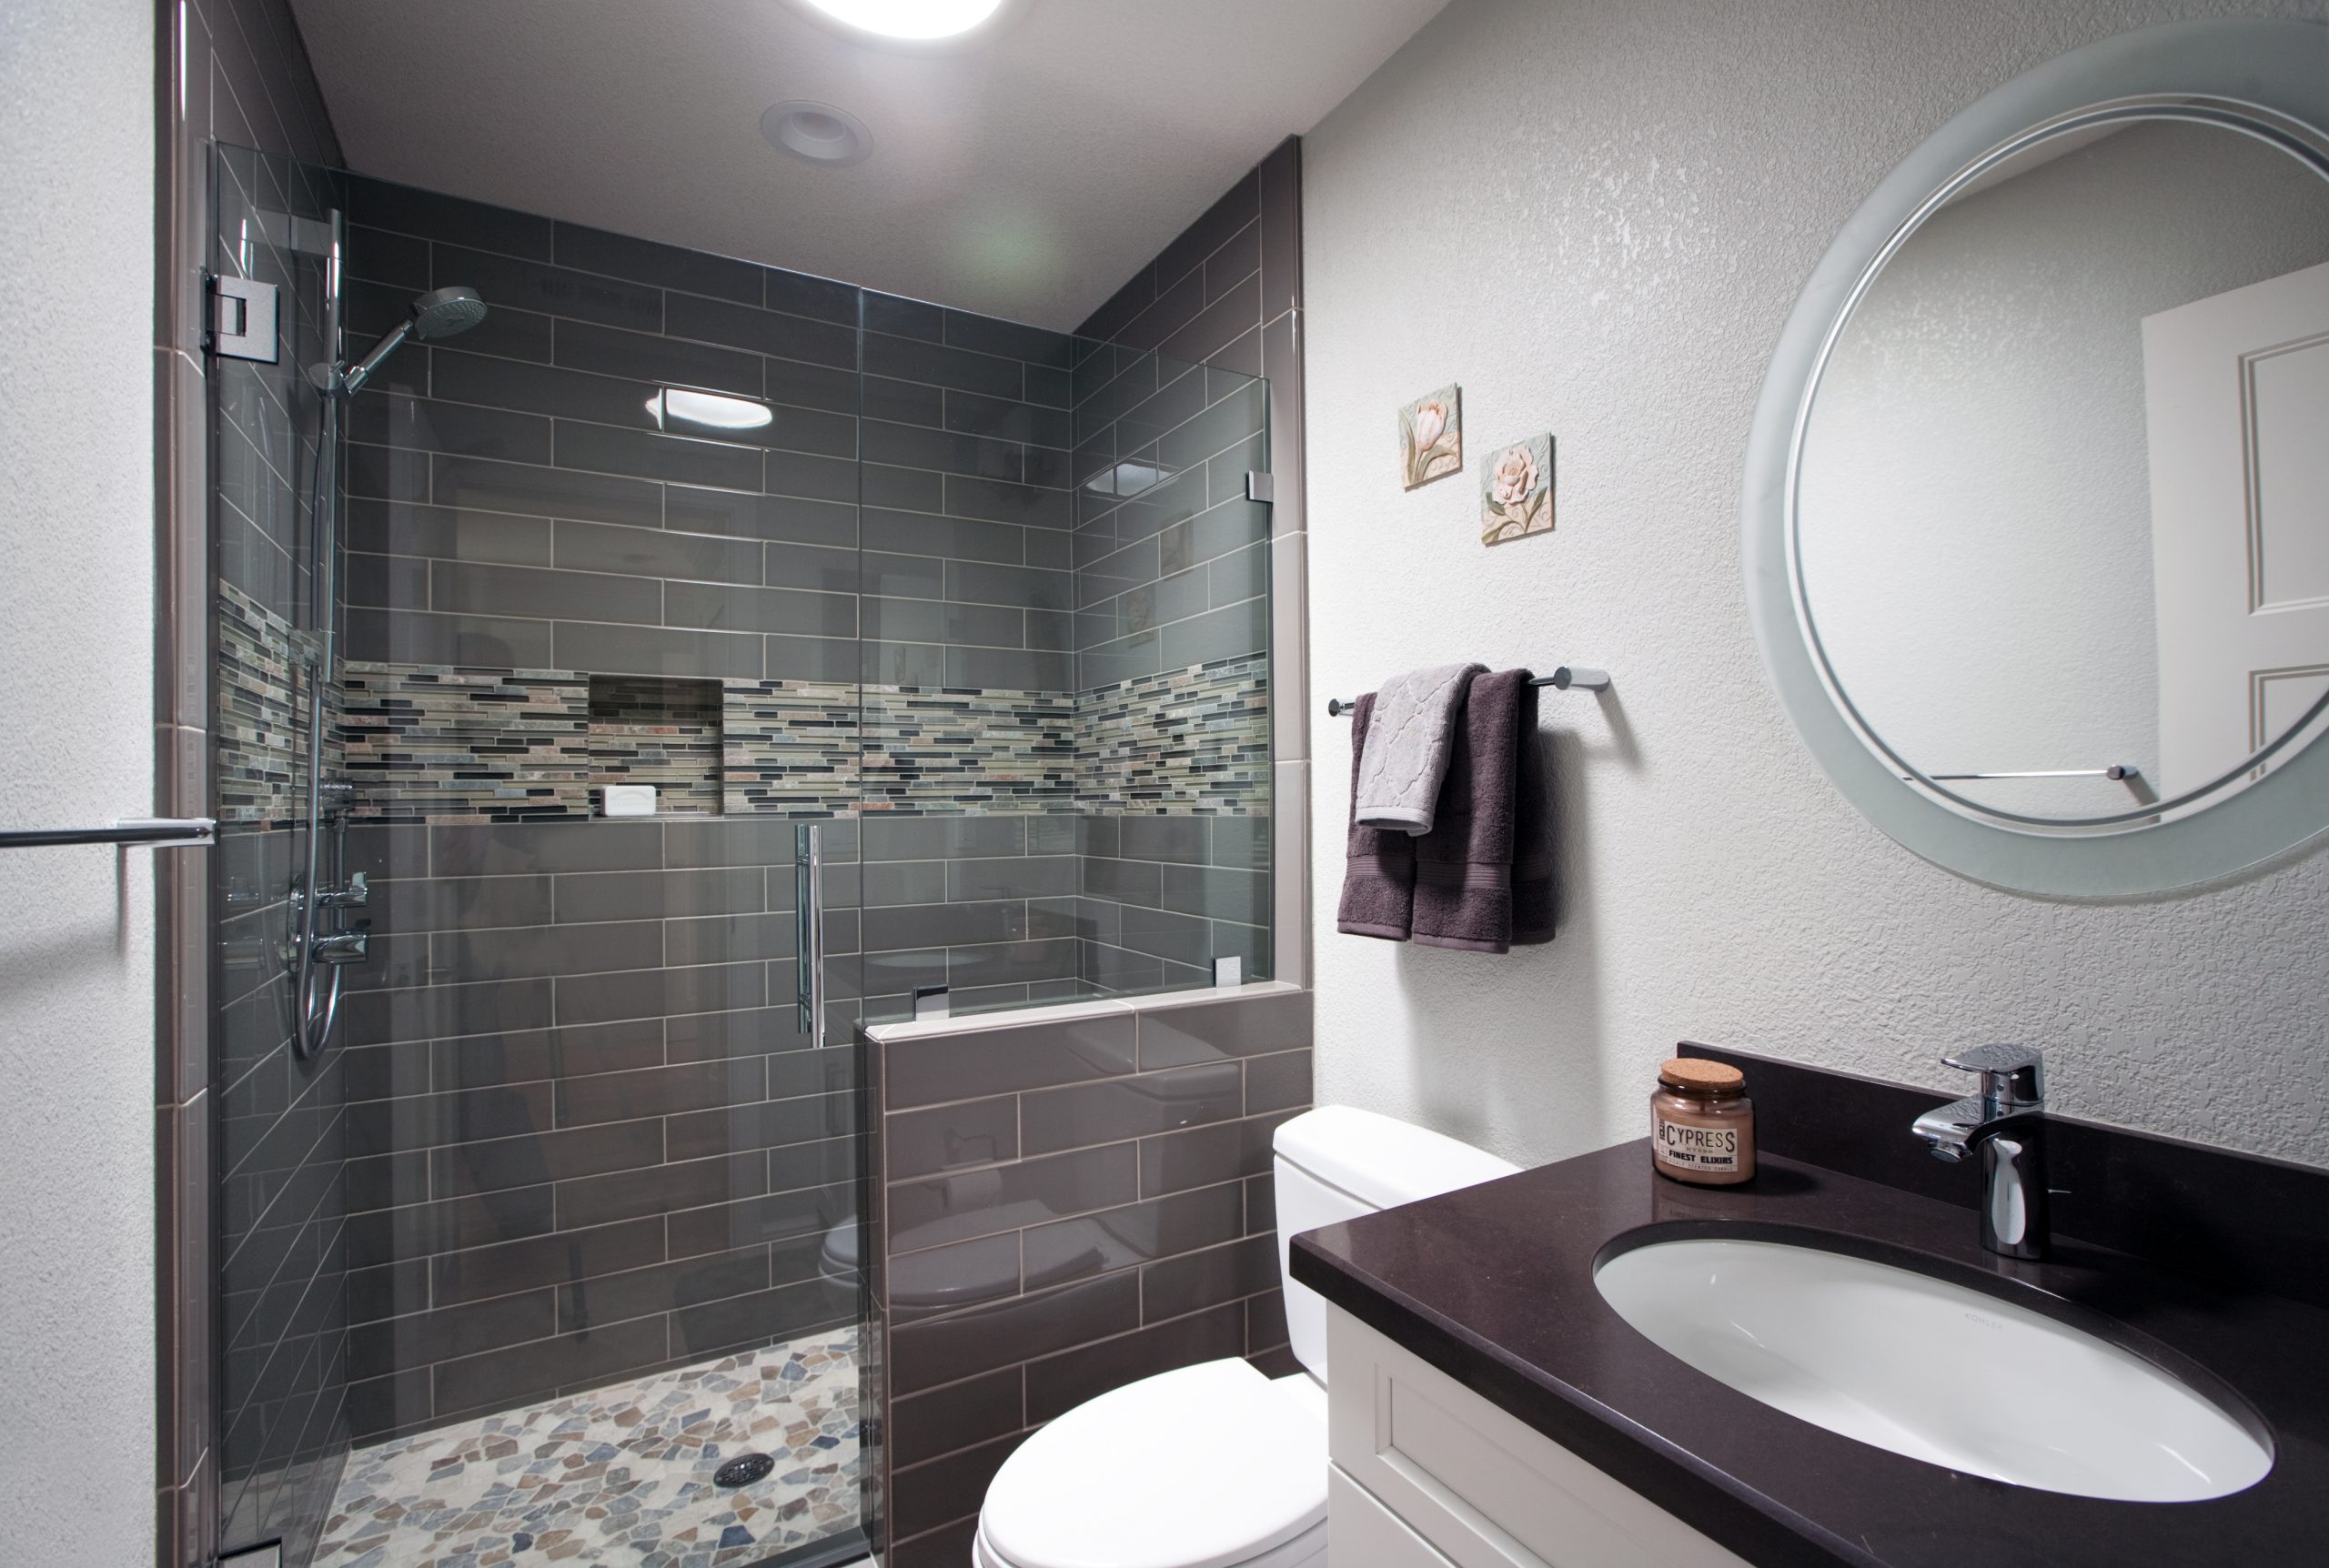 A modern bathroom with grey tile and stone shower floor.